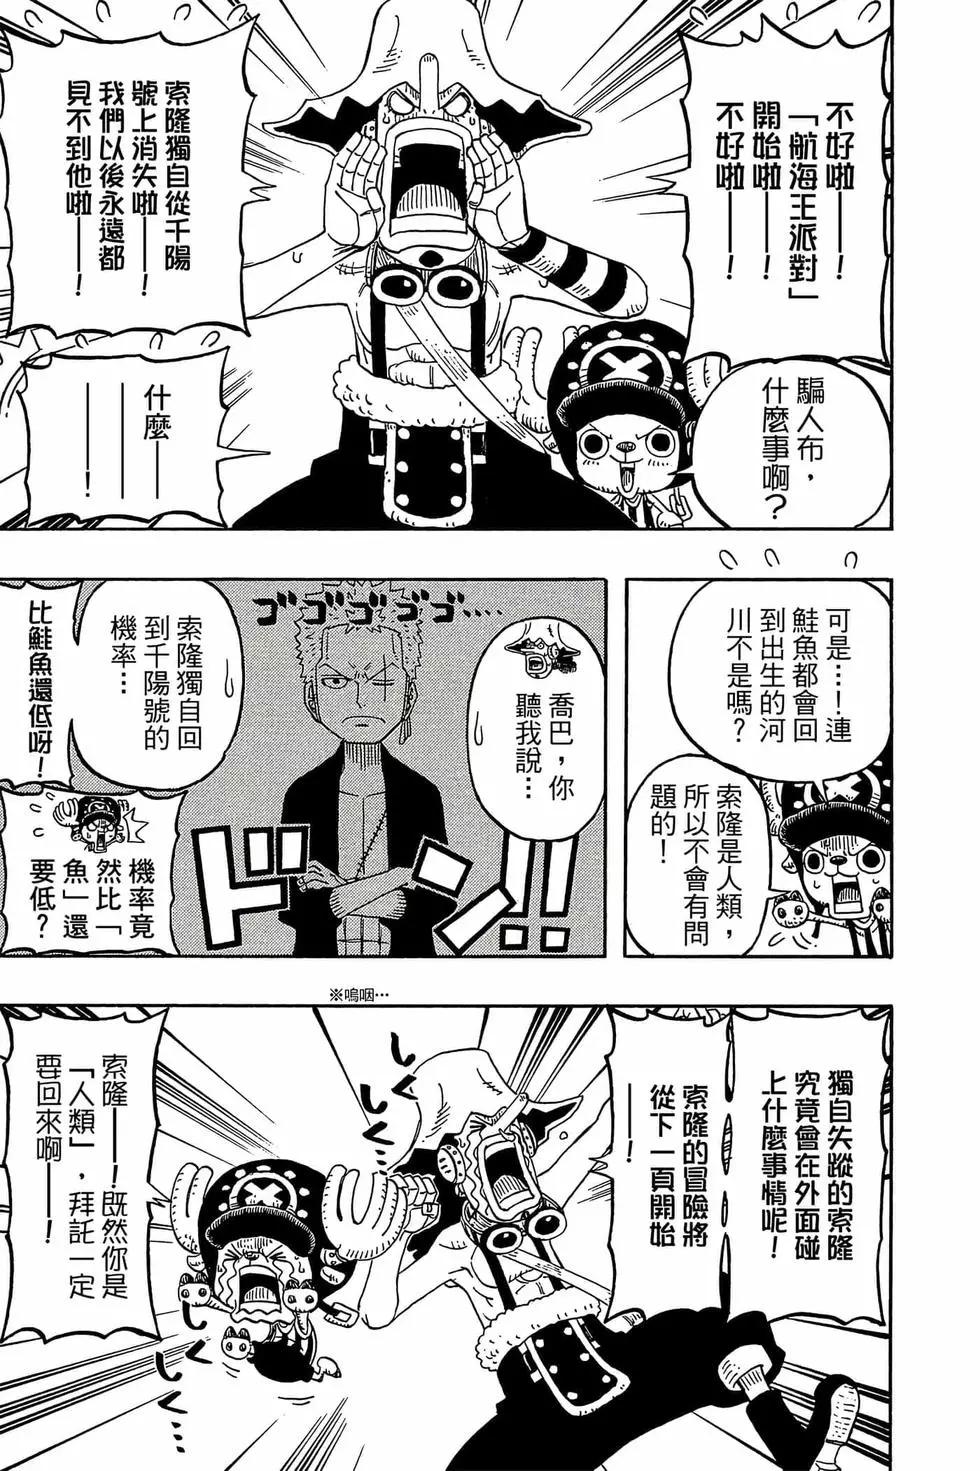 One piece party - 第02卷(1/4) - 4